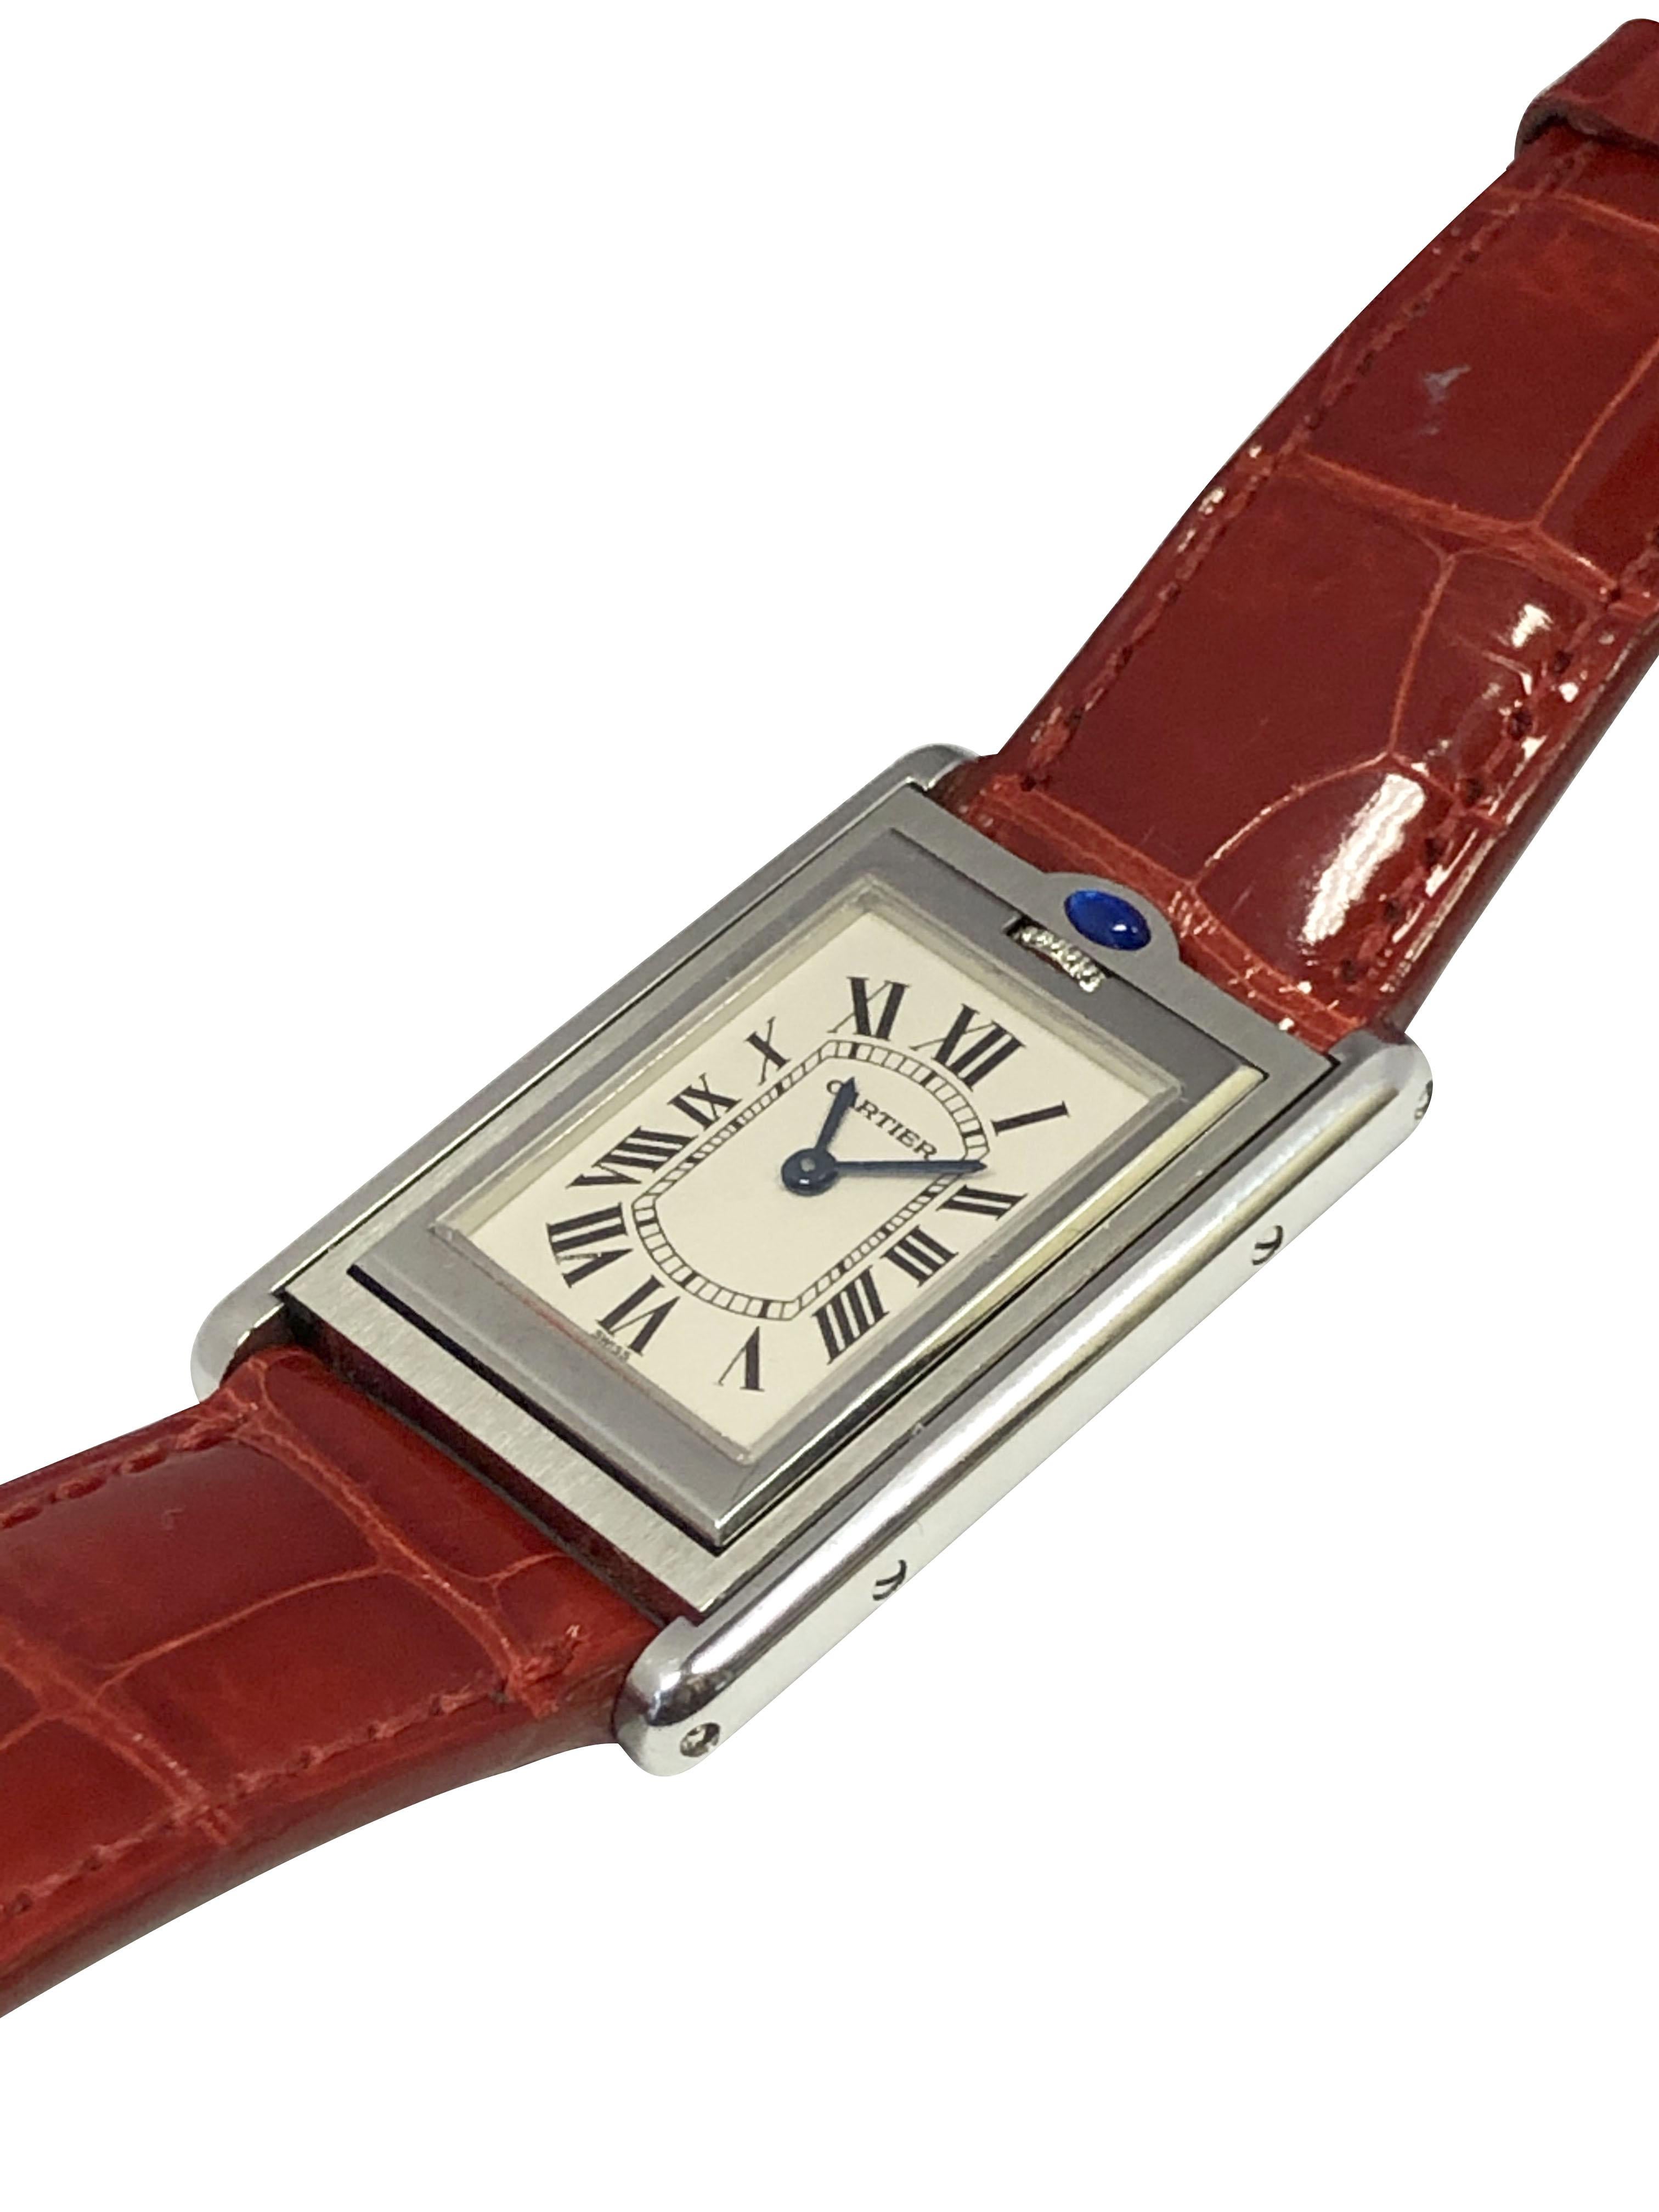 Circa 2000 Cartier Basculante Wrist Watch, 27 X 23.5 M.M. Stainless Steel 3 Piece case. Quartz movement, Silver White dial with Black Roman numerals and a Cabochon Sapphire at the pull to flip the watch. Original Red leather strap with Steel Tang